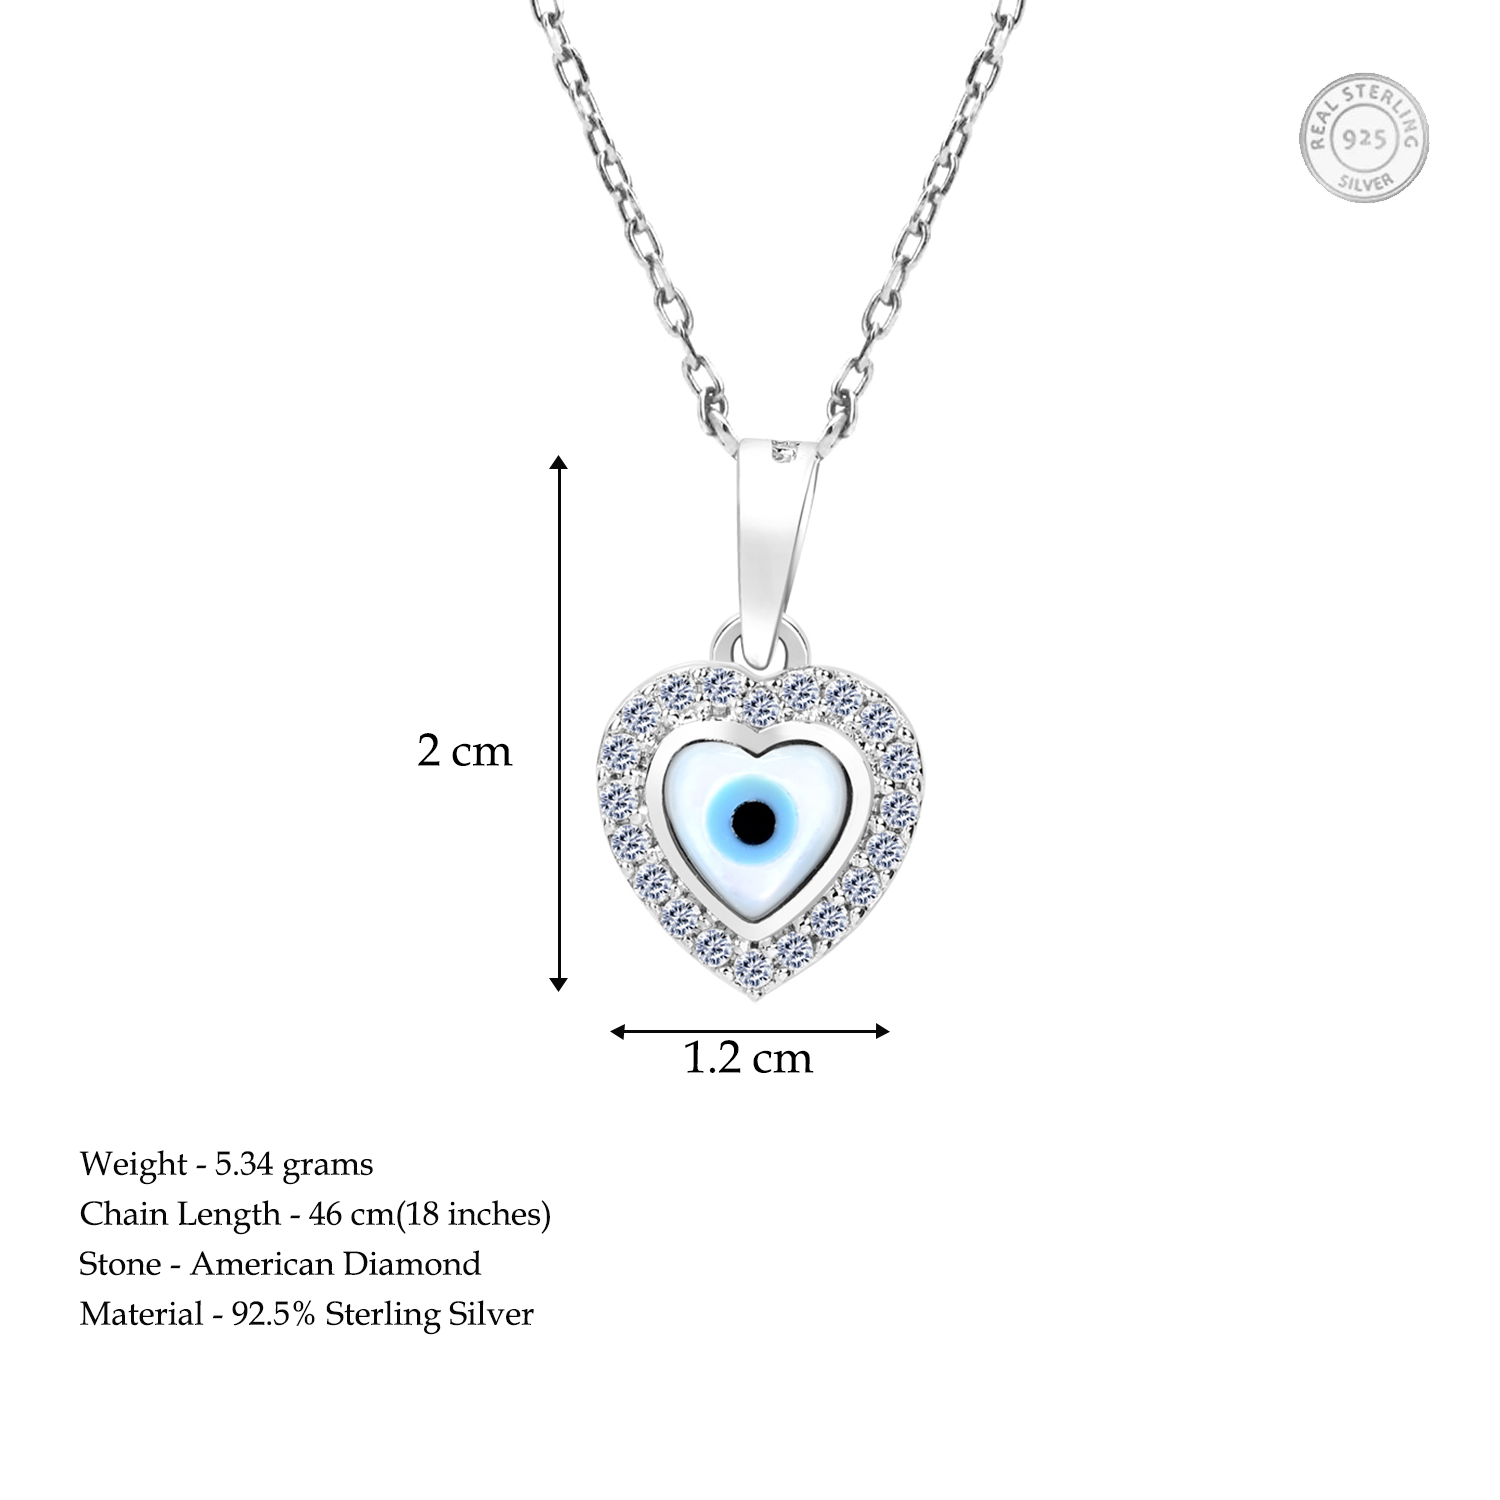 The ever glowing heart silver chain pendant